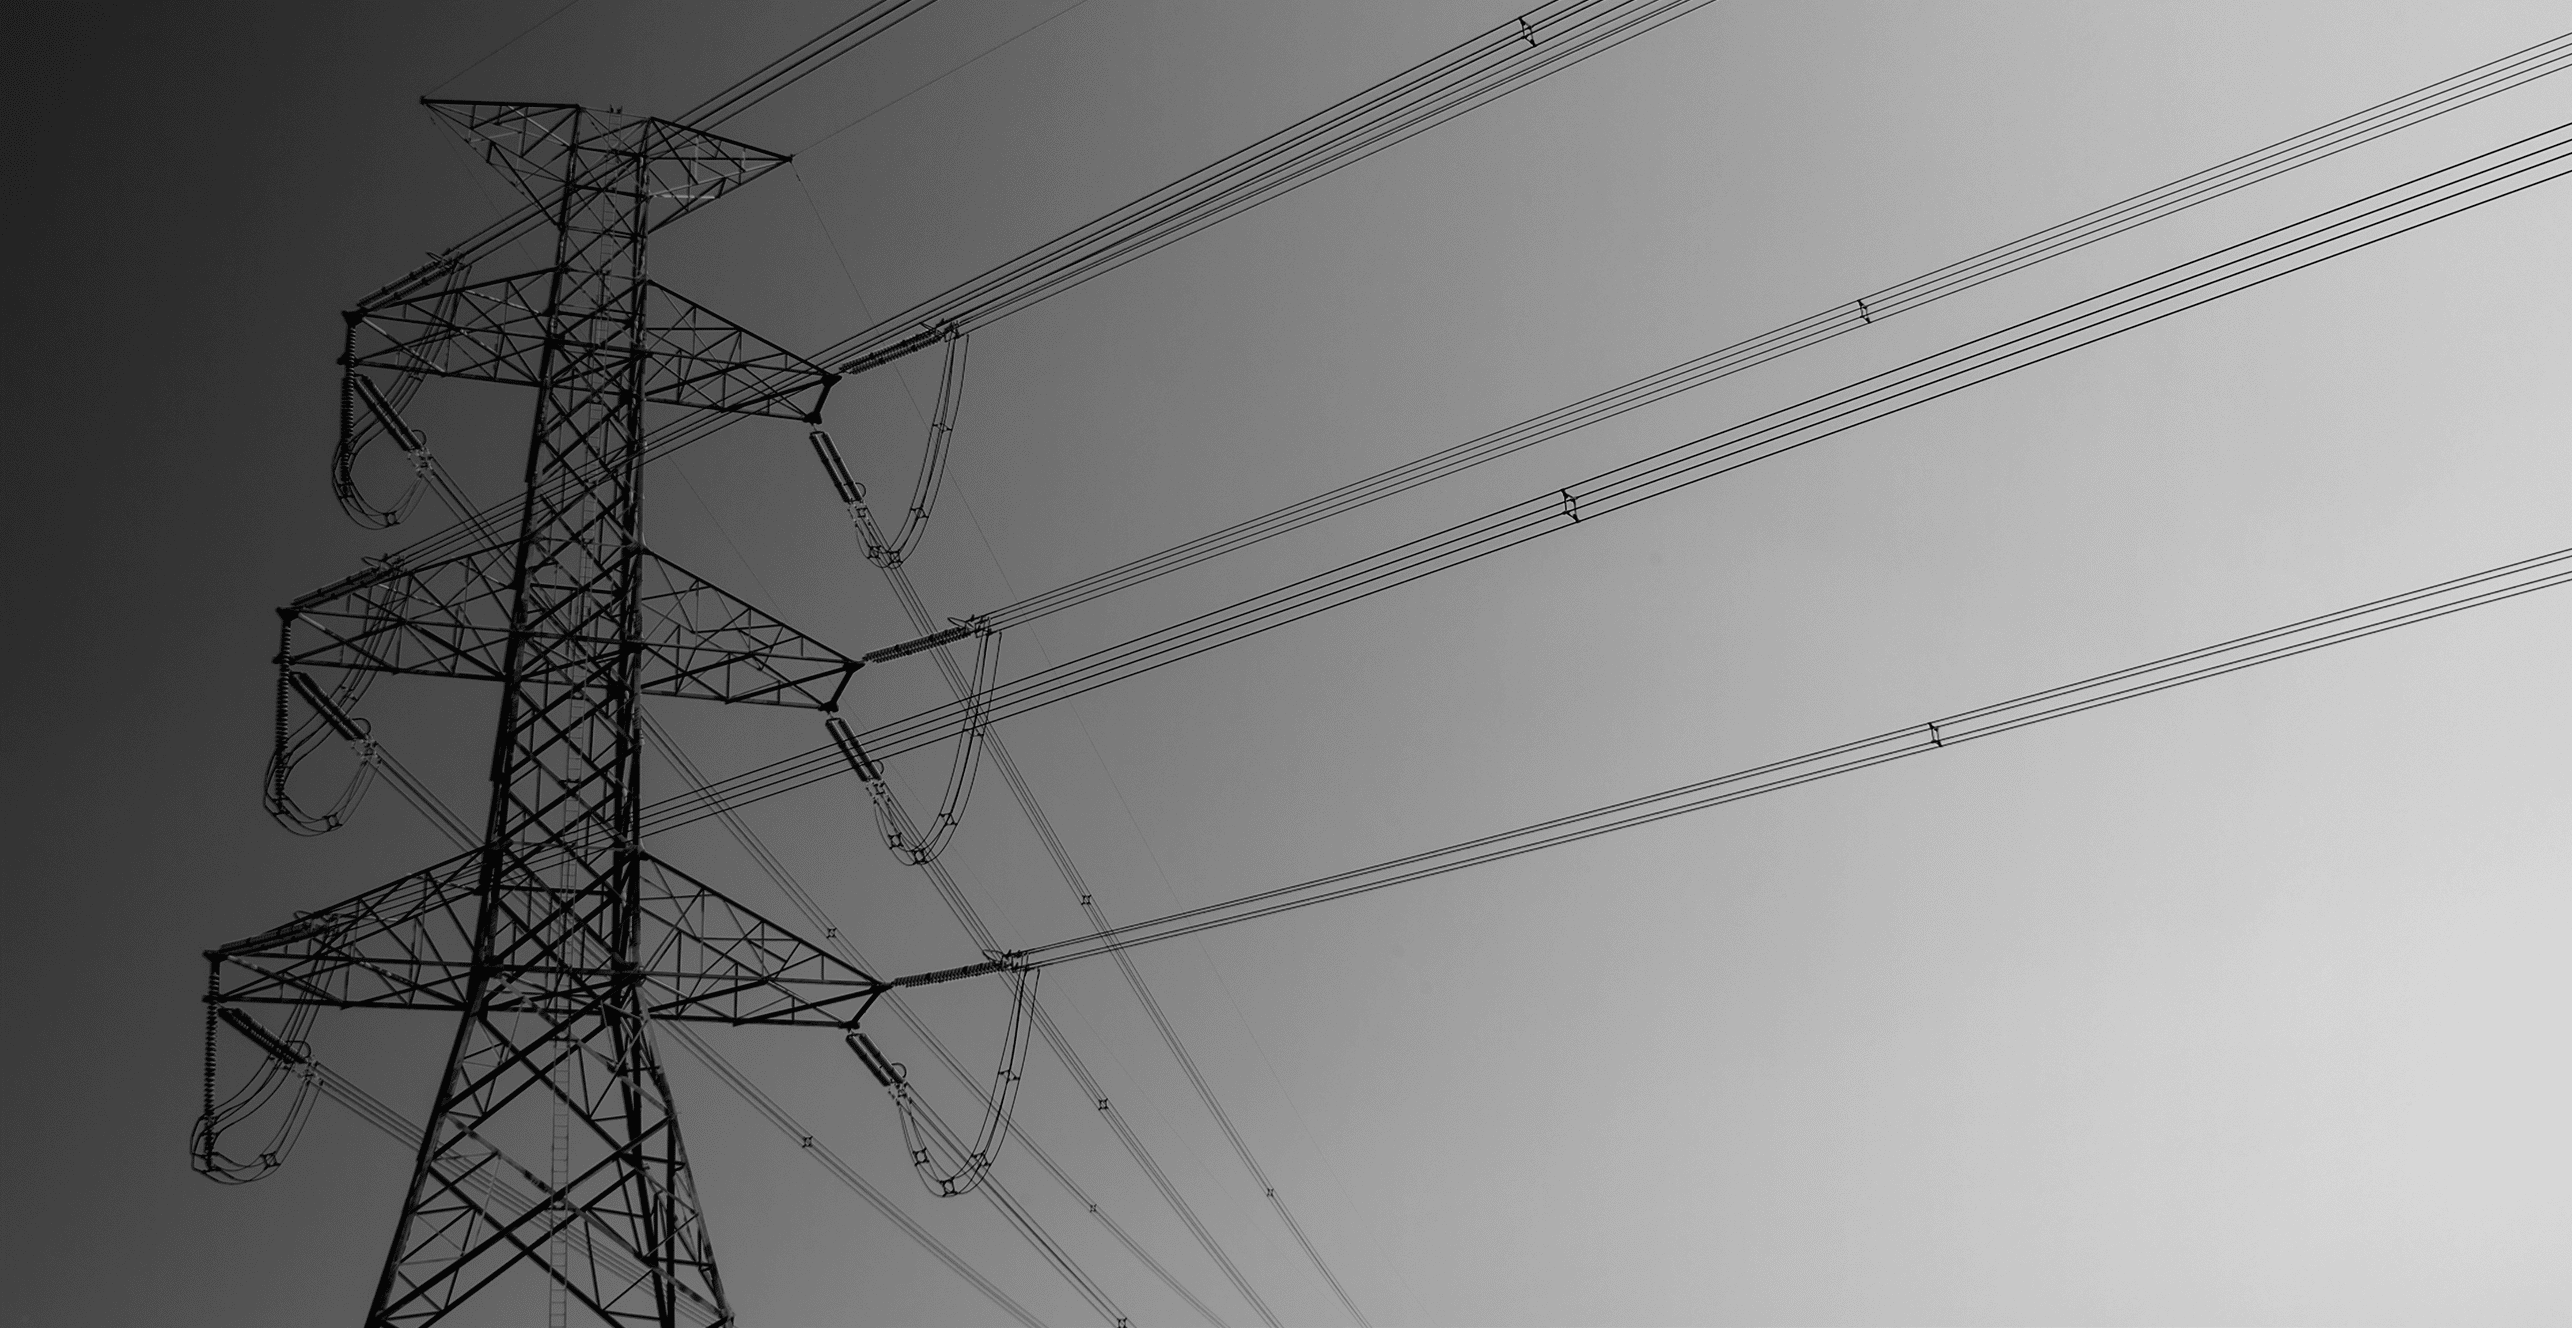 Image of power lines